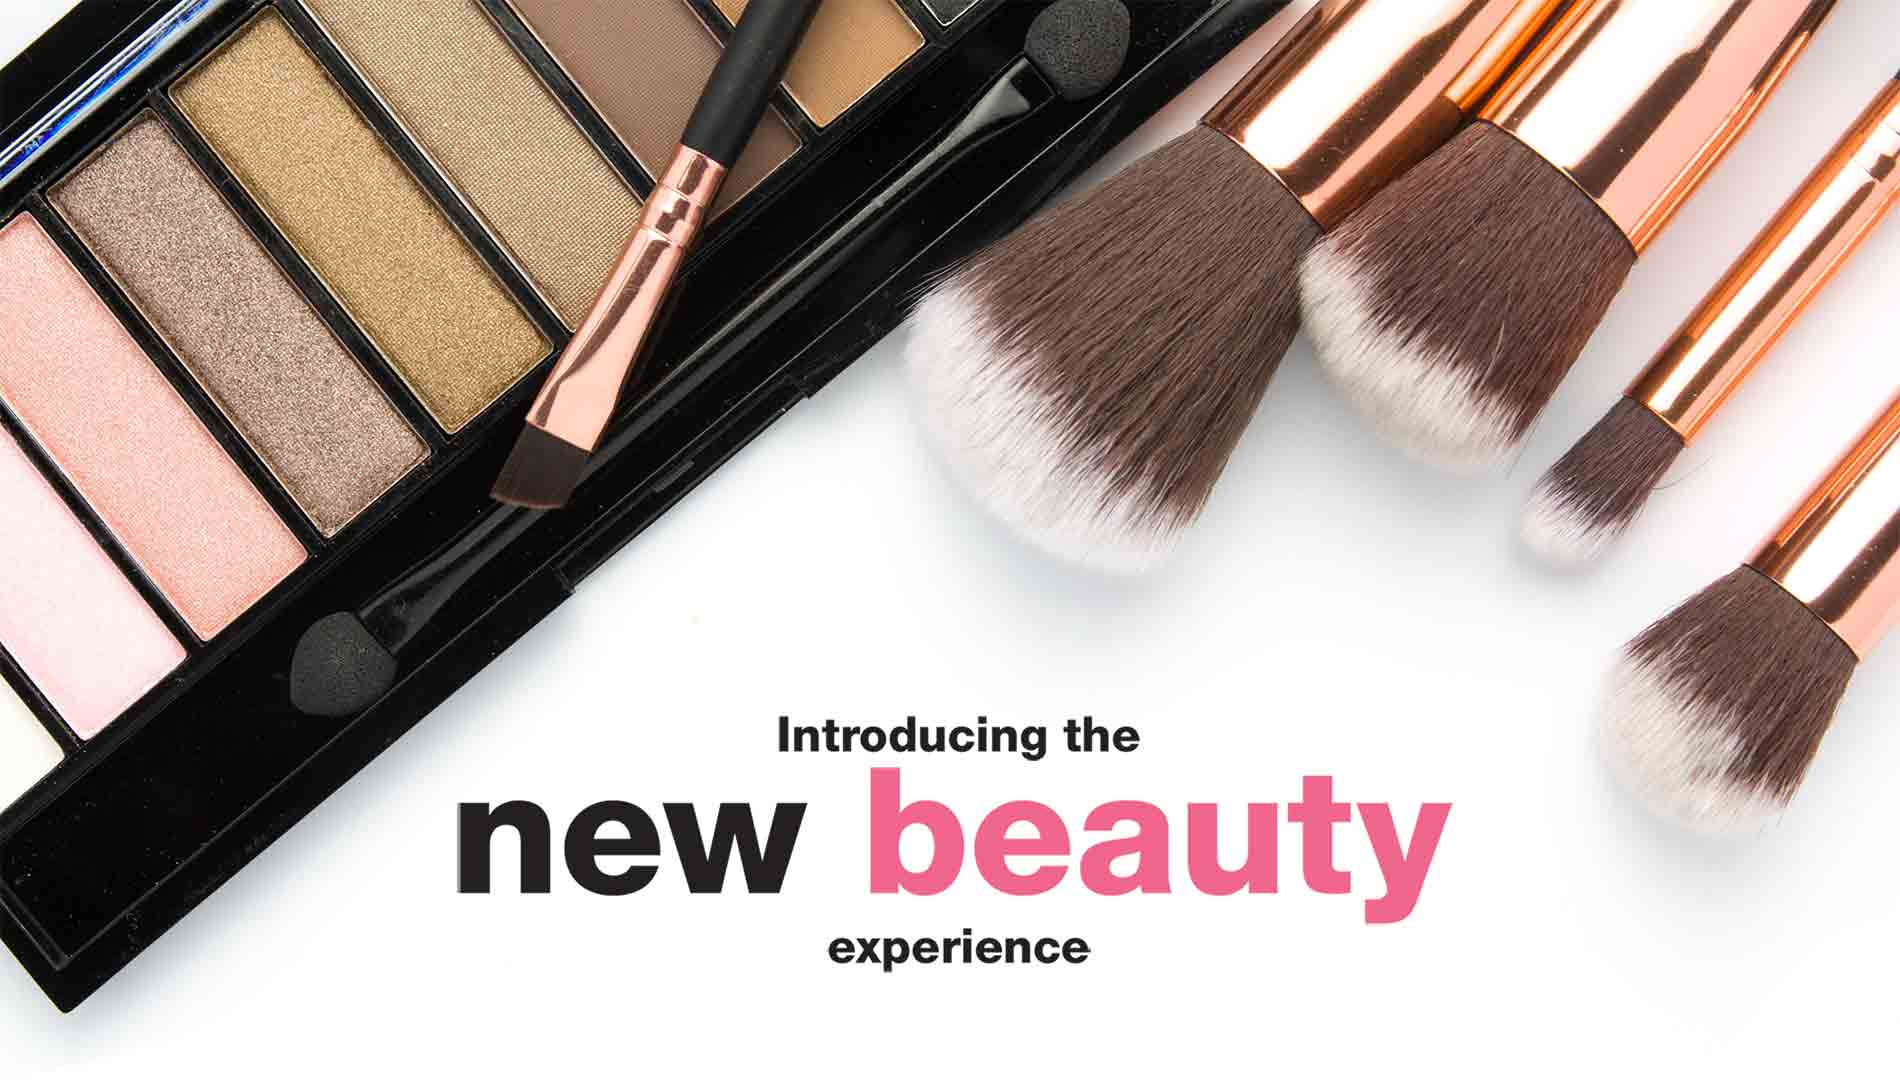 Introducing the new beauty experience.